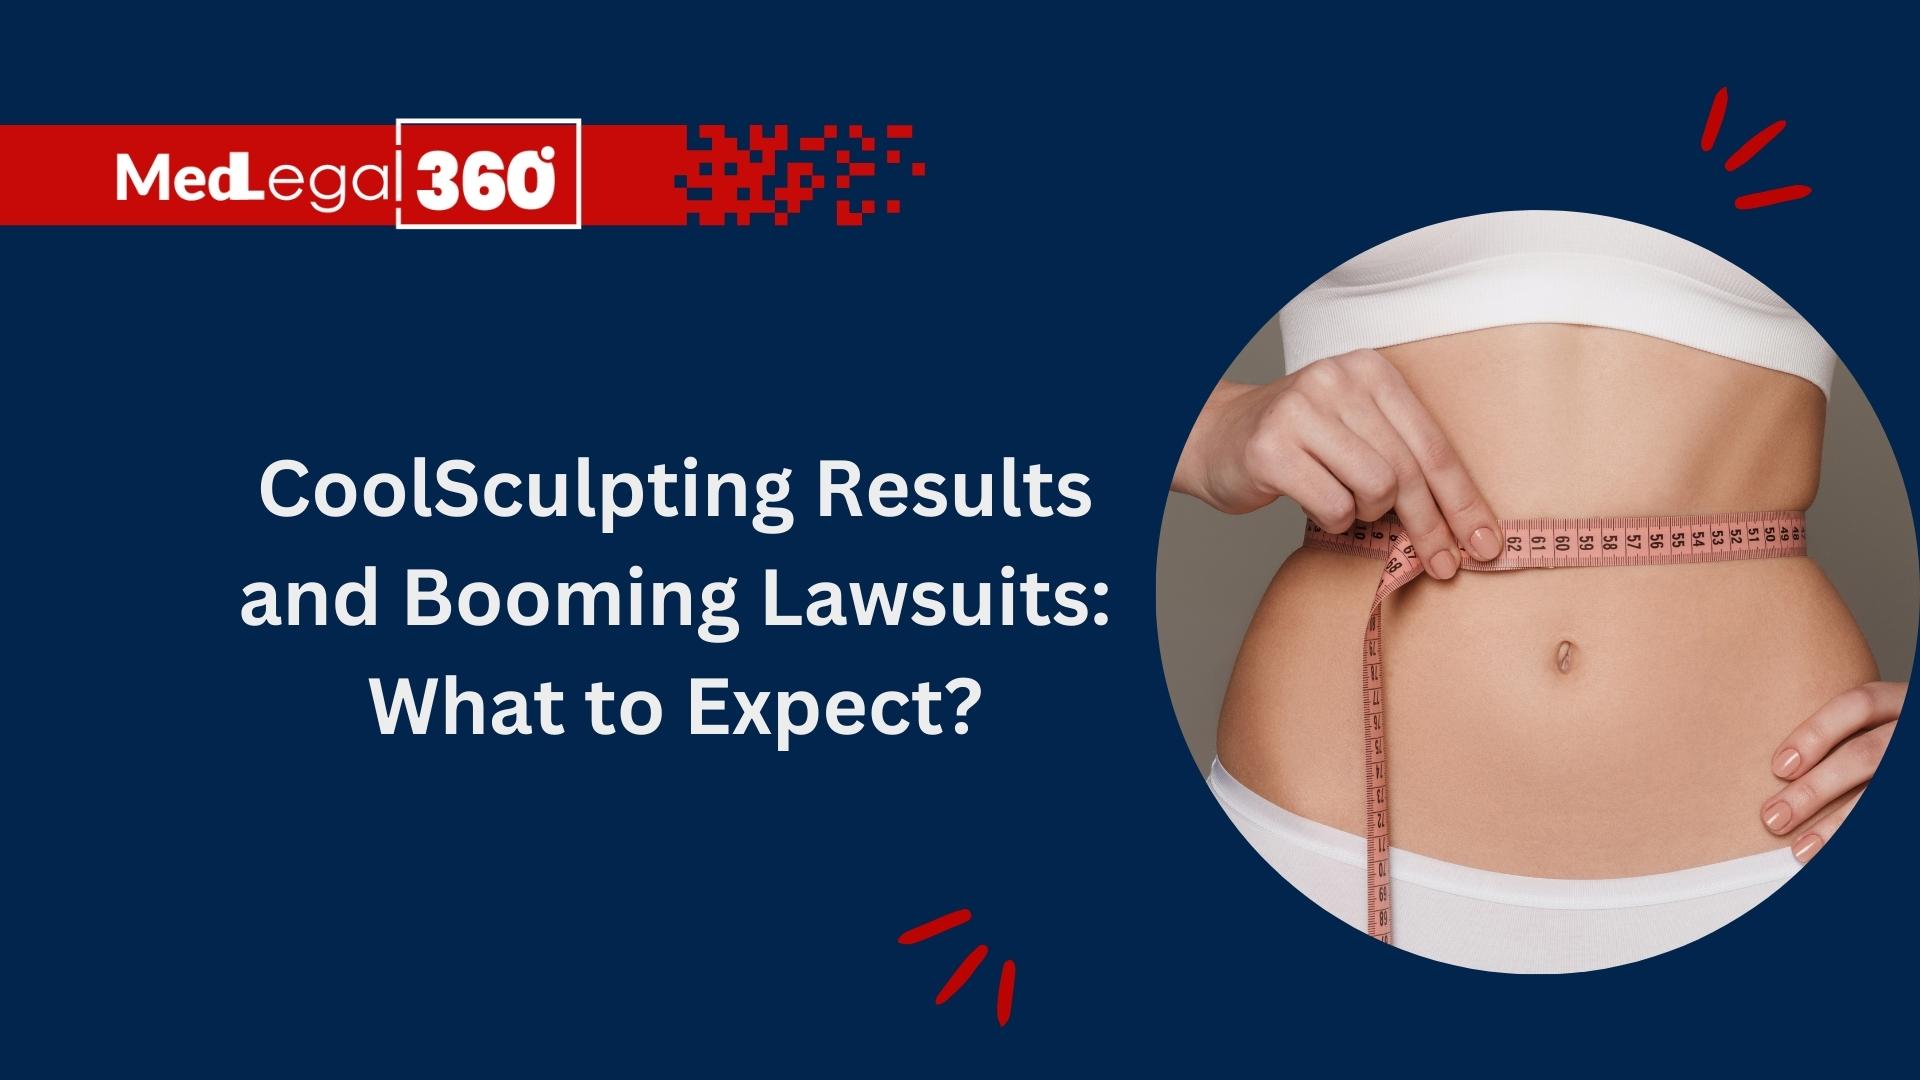 CoolSculpting Results and Booming Lawsuits: What to Expect?